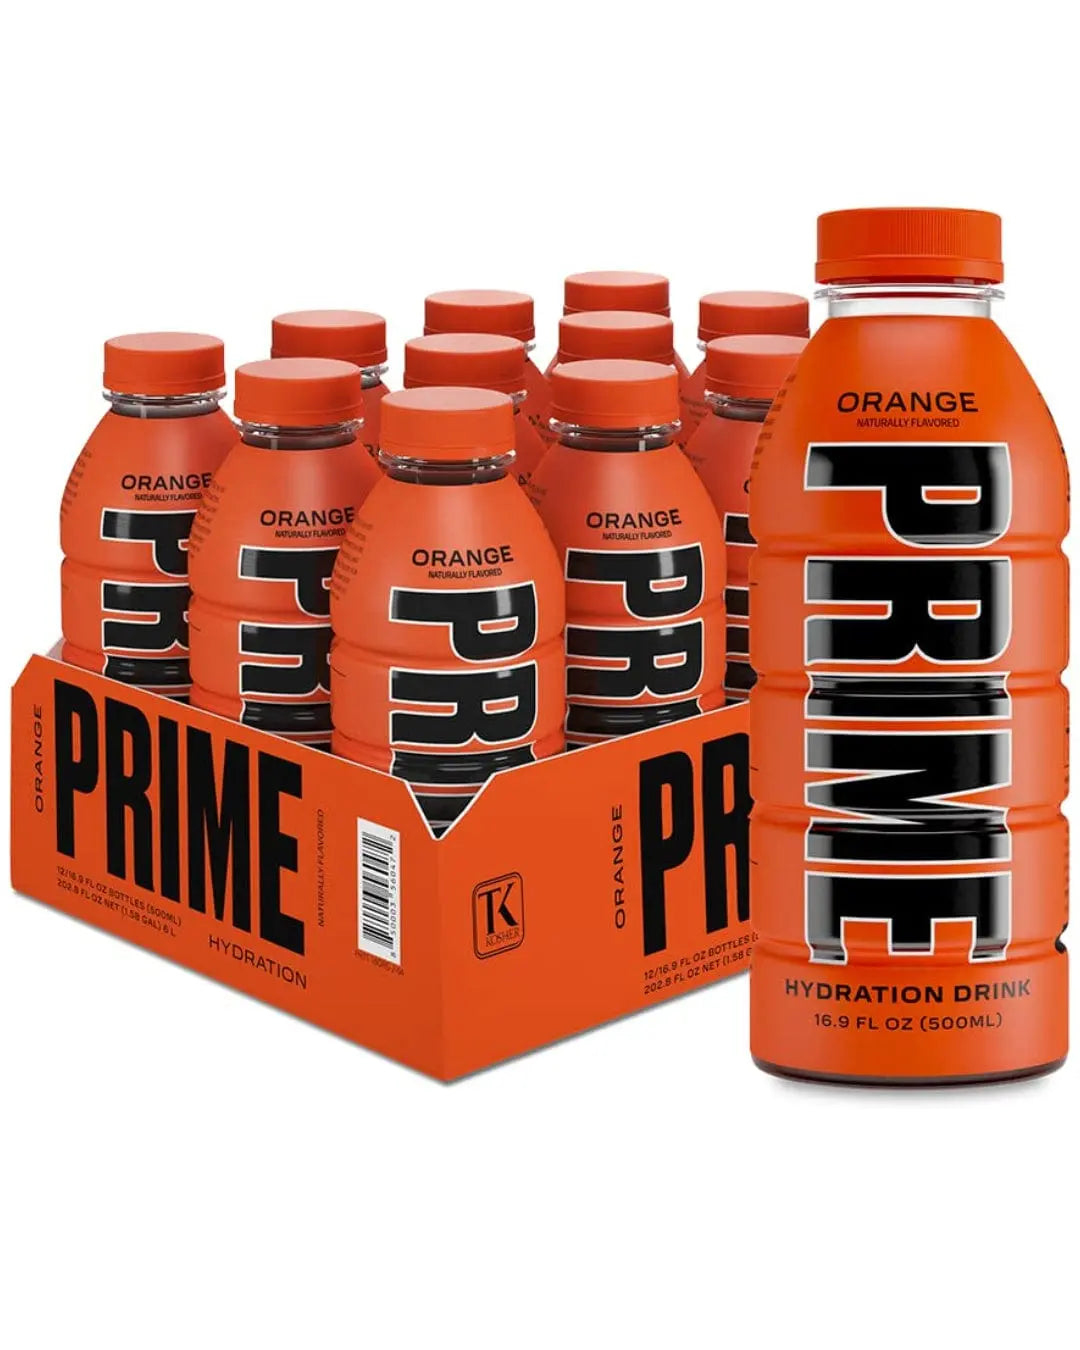 Prime Orange Hydration Drink Multipack, 12 x 500 ml Soft Drinks & Mixers